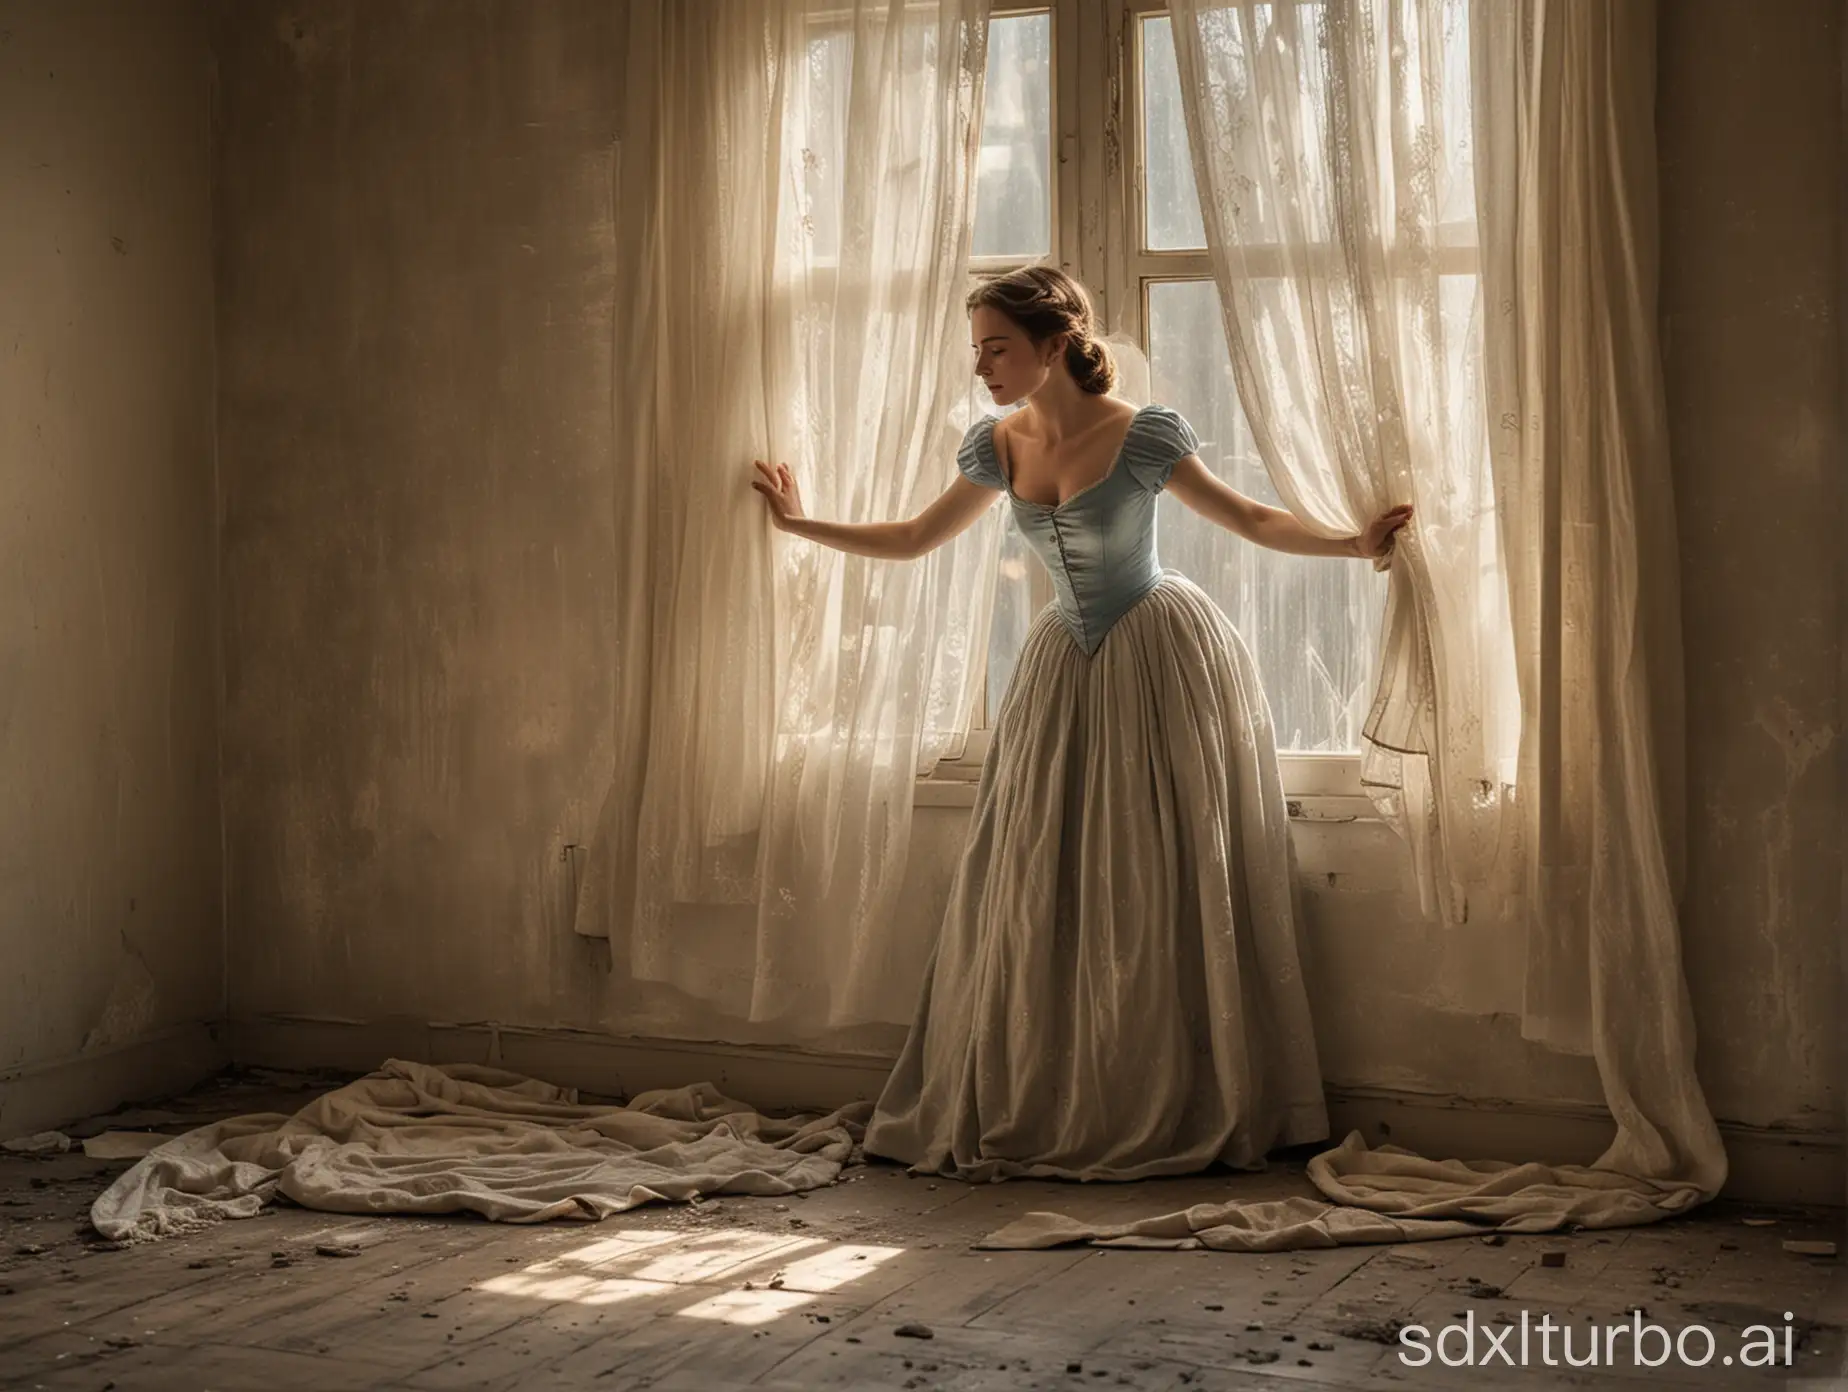 Depicting the interior of a dusty and dilapidated cottage, sunlight filters through the cracks in the curtains, casting onto the cold floor. In the corner, Cinderella dressed in tattered clothes, silently sweeping the floor. Her movements are gentle and rhythmic, despite her plight, a glimmer of hope still shines in her eyes.